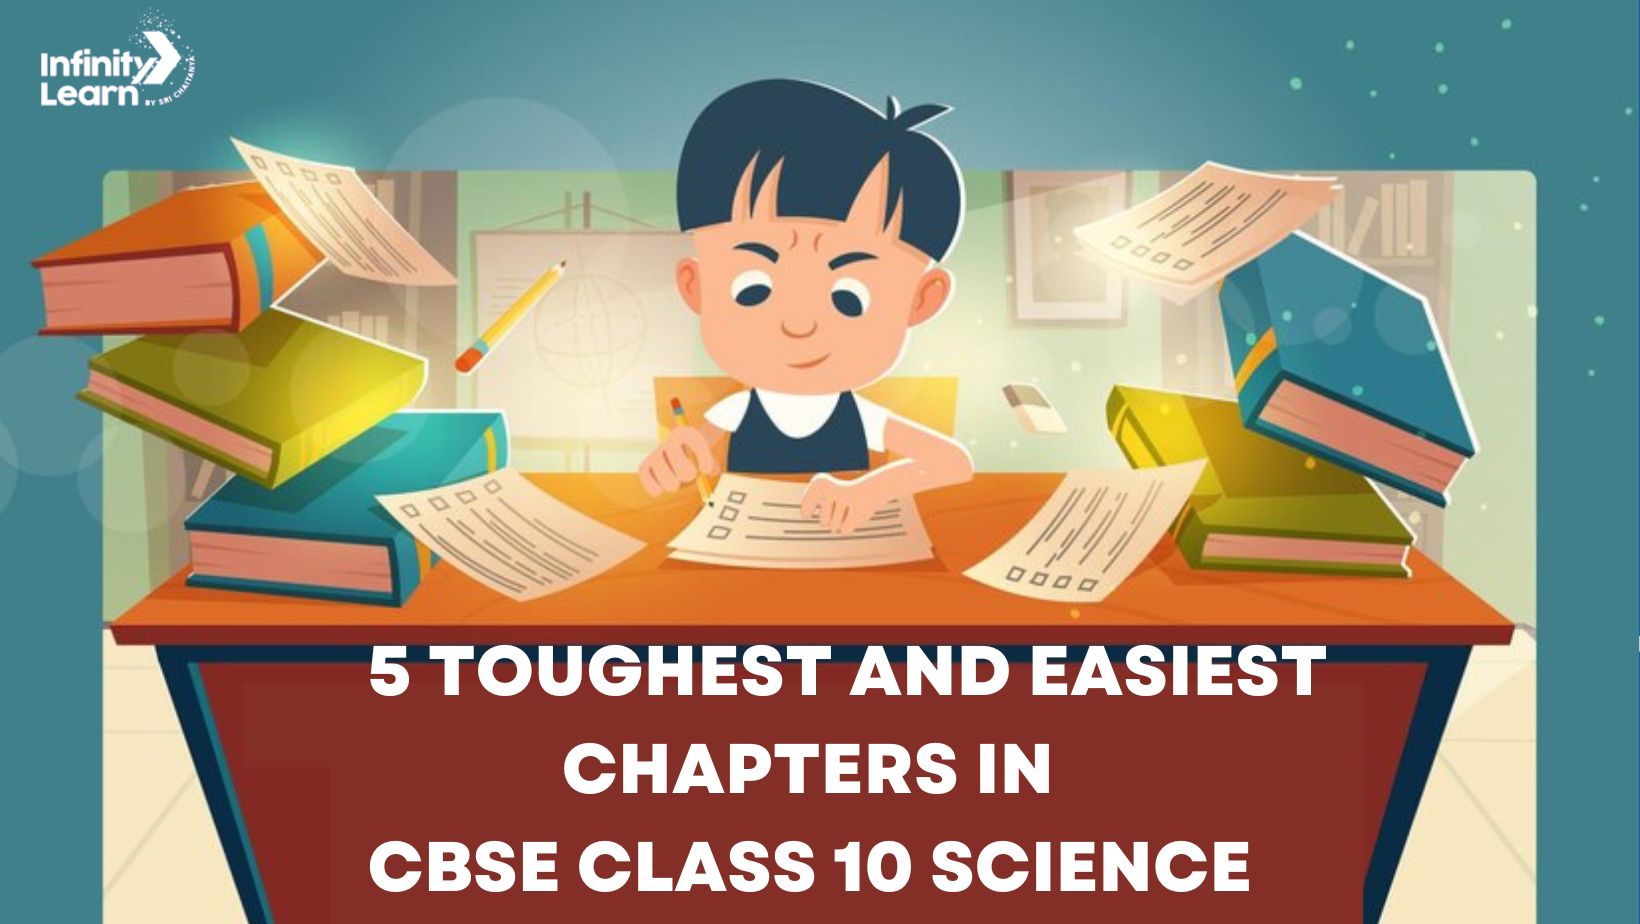 5 Toughest and Easiest Chapters in CBSE Class 10 Science